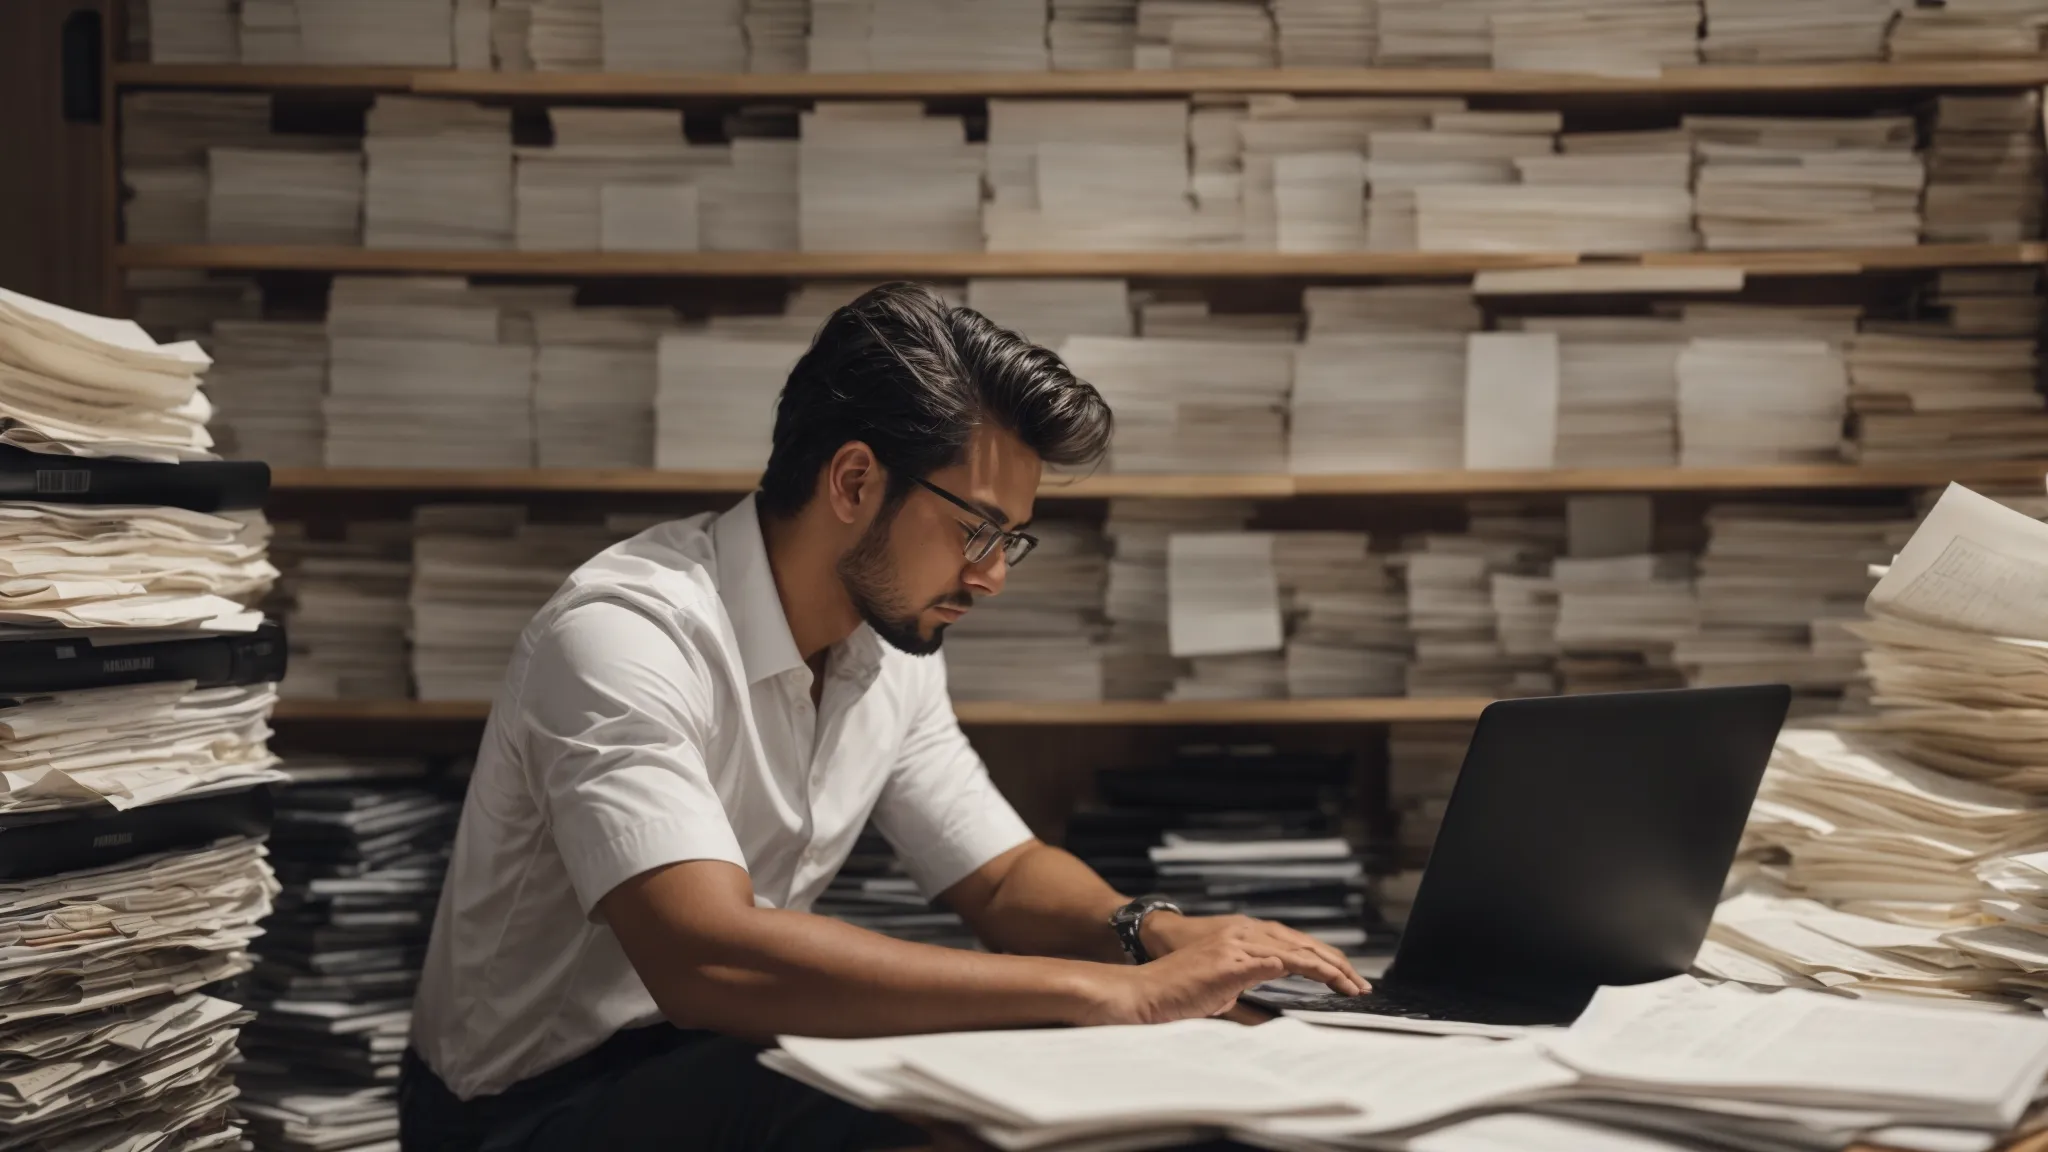 Create an image showcasing a person diligently researching on a laptop, surrounded by stacks of papers and a world map pinned with locations of local real estate investors.